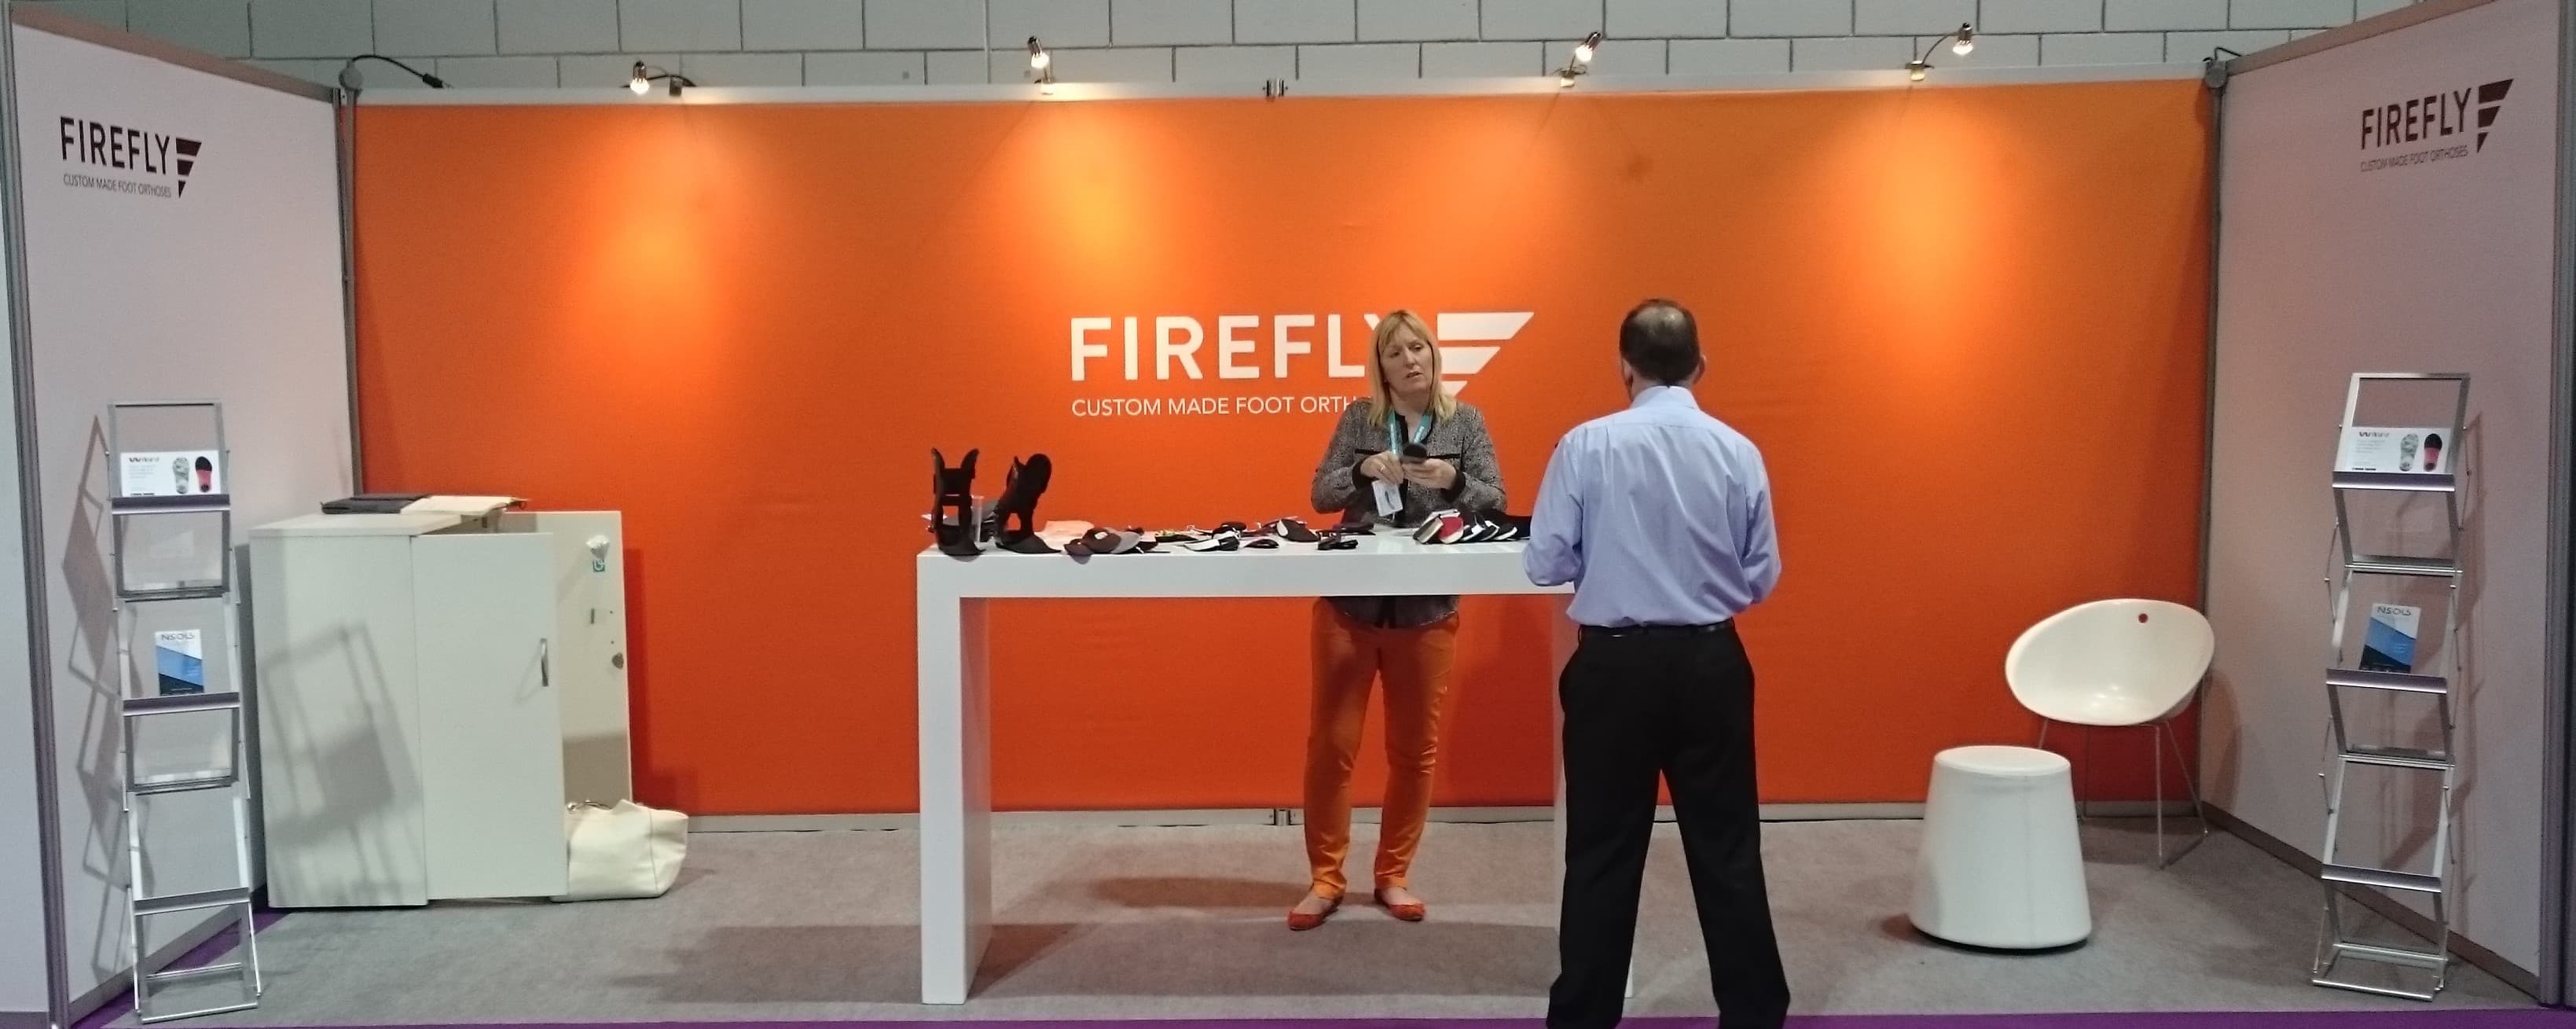 Firefly stand at COP Annual Conference 2016